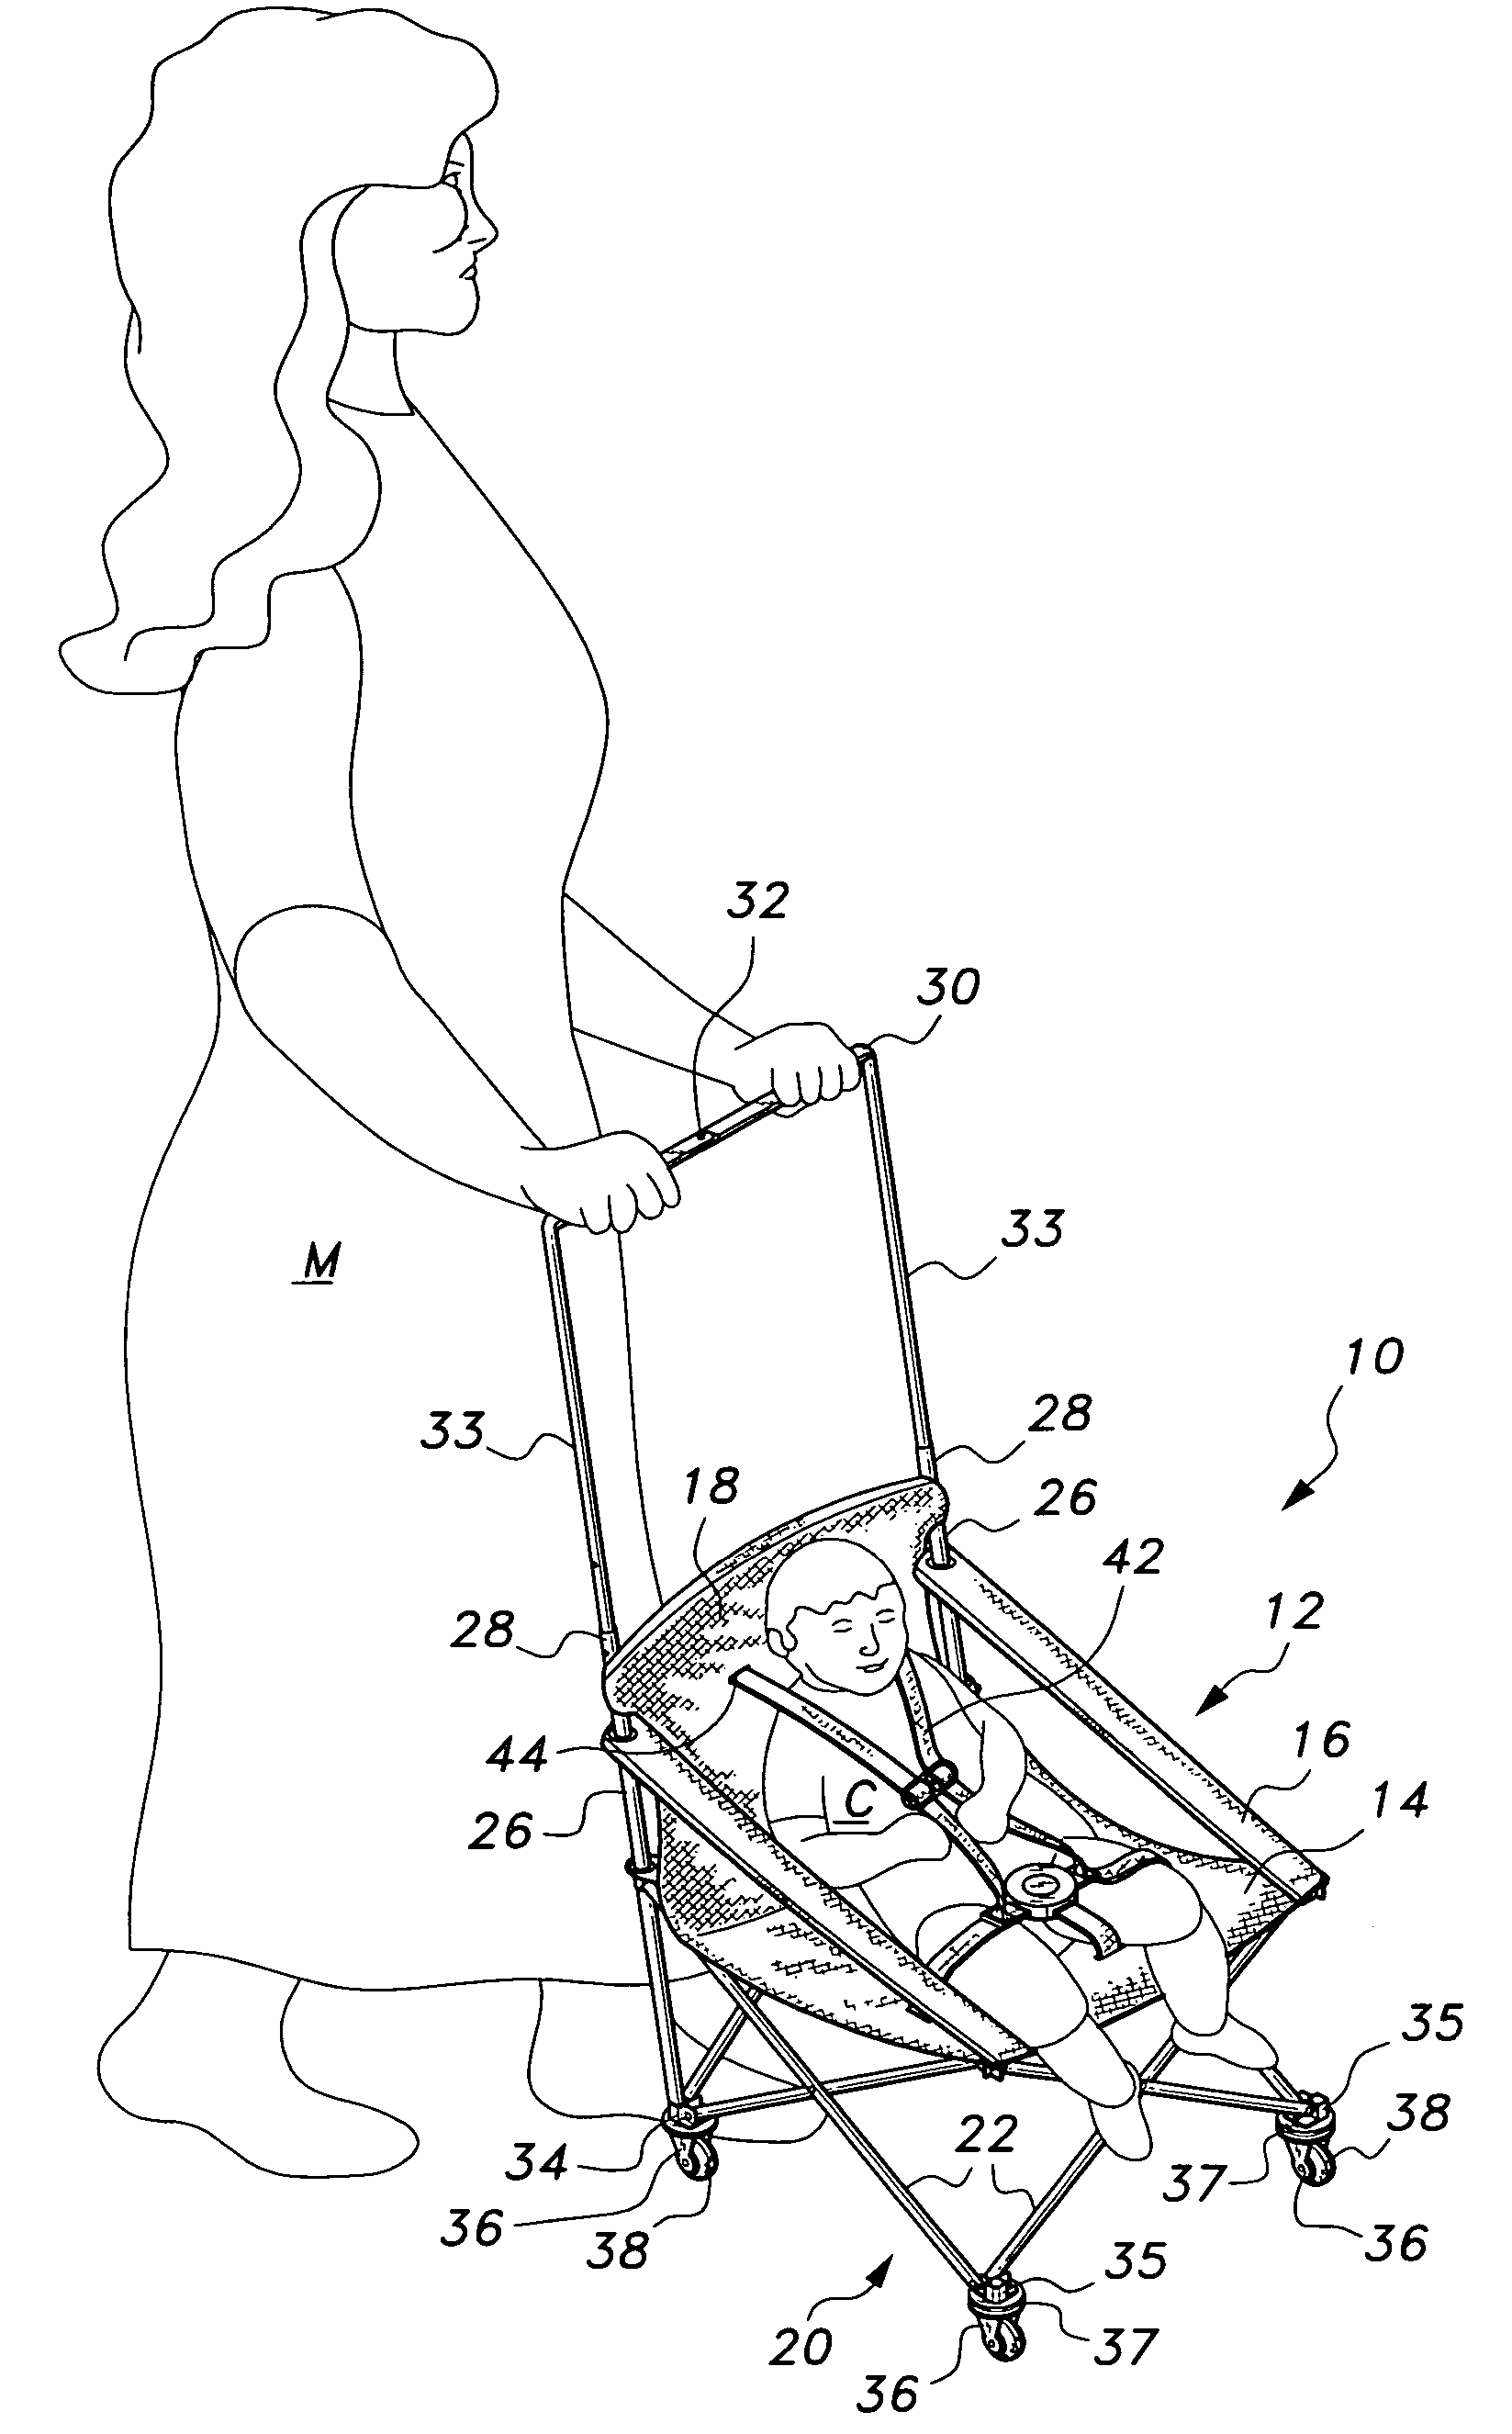 Collapsible stroller